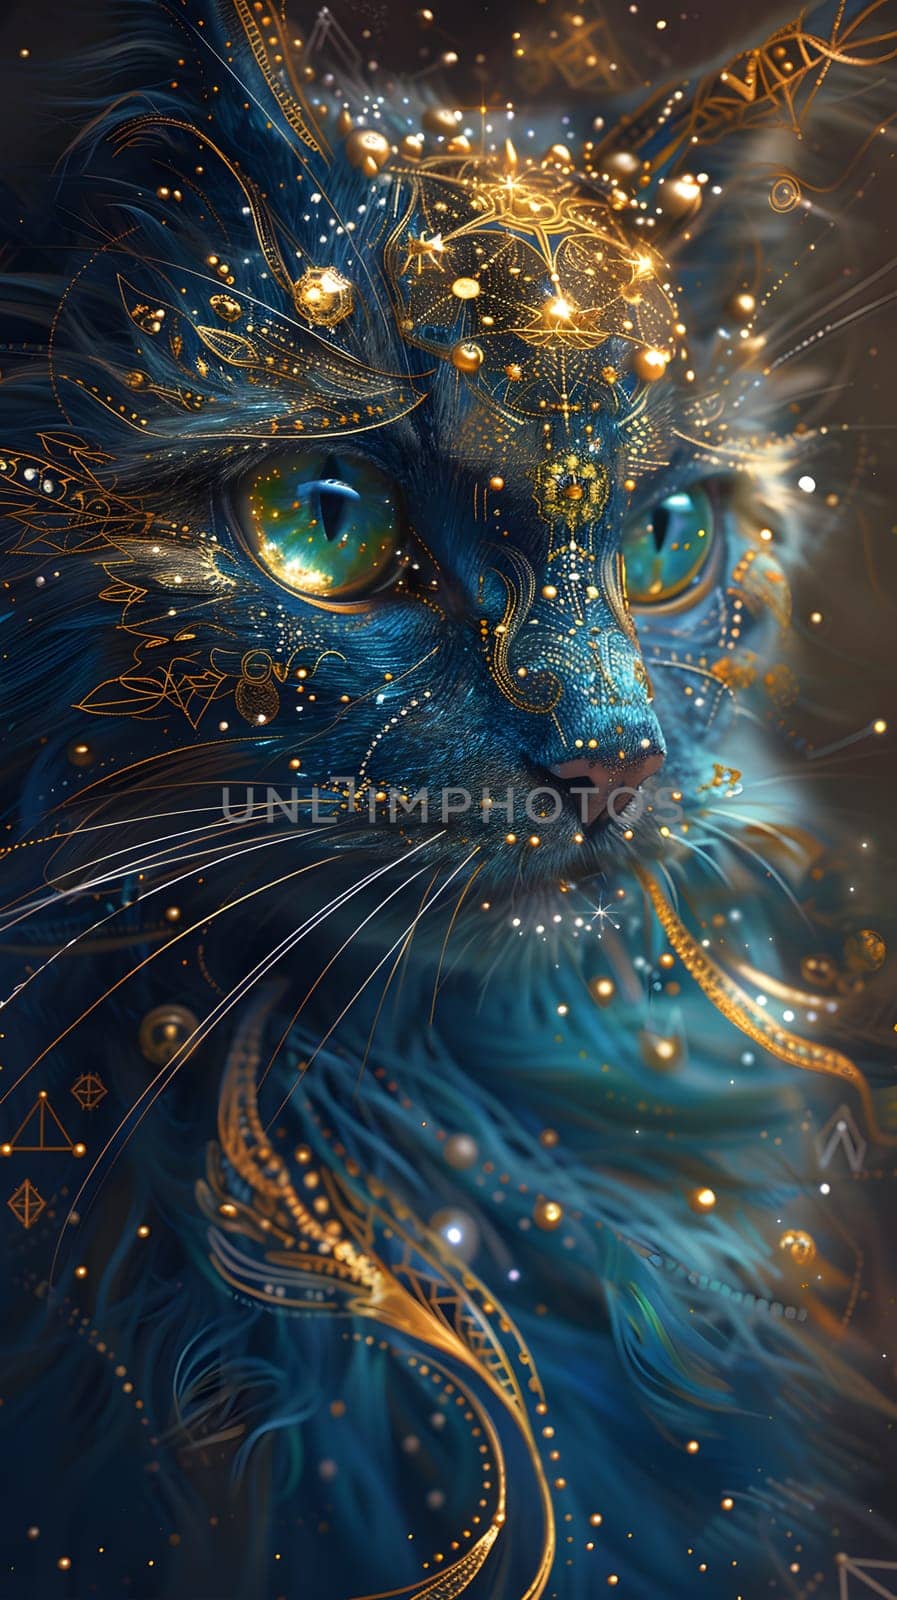 a blue and gold painting of a cat with green eyes by Nadtochiy